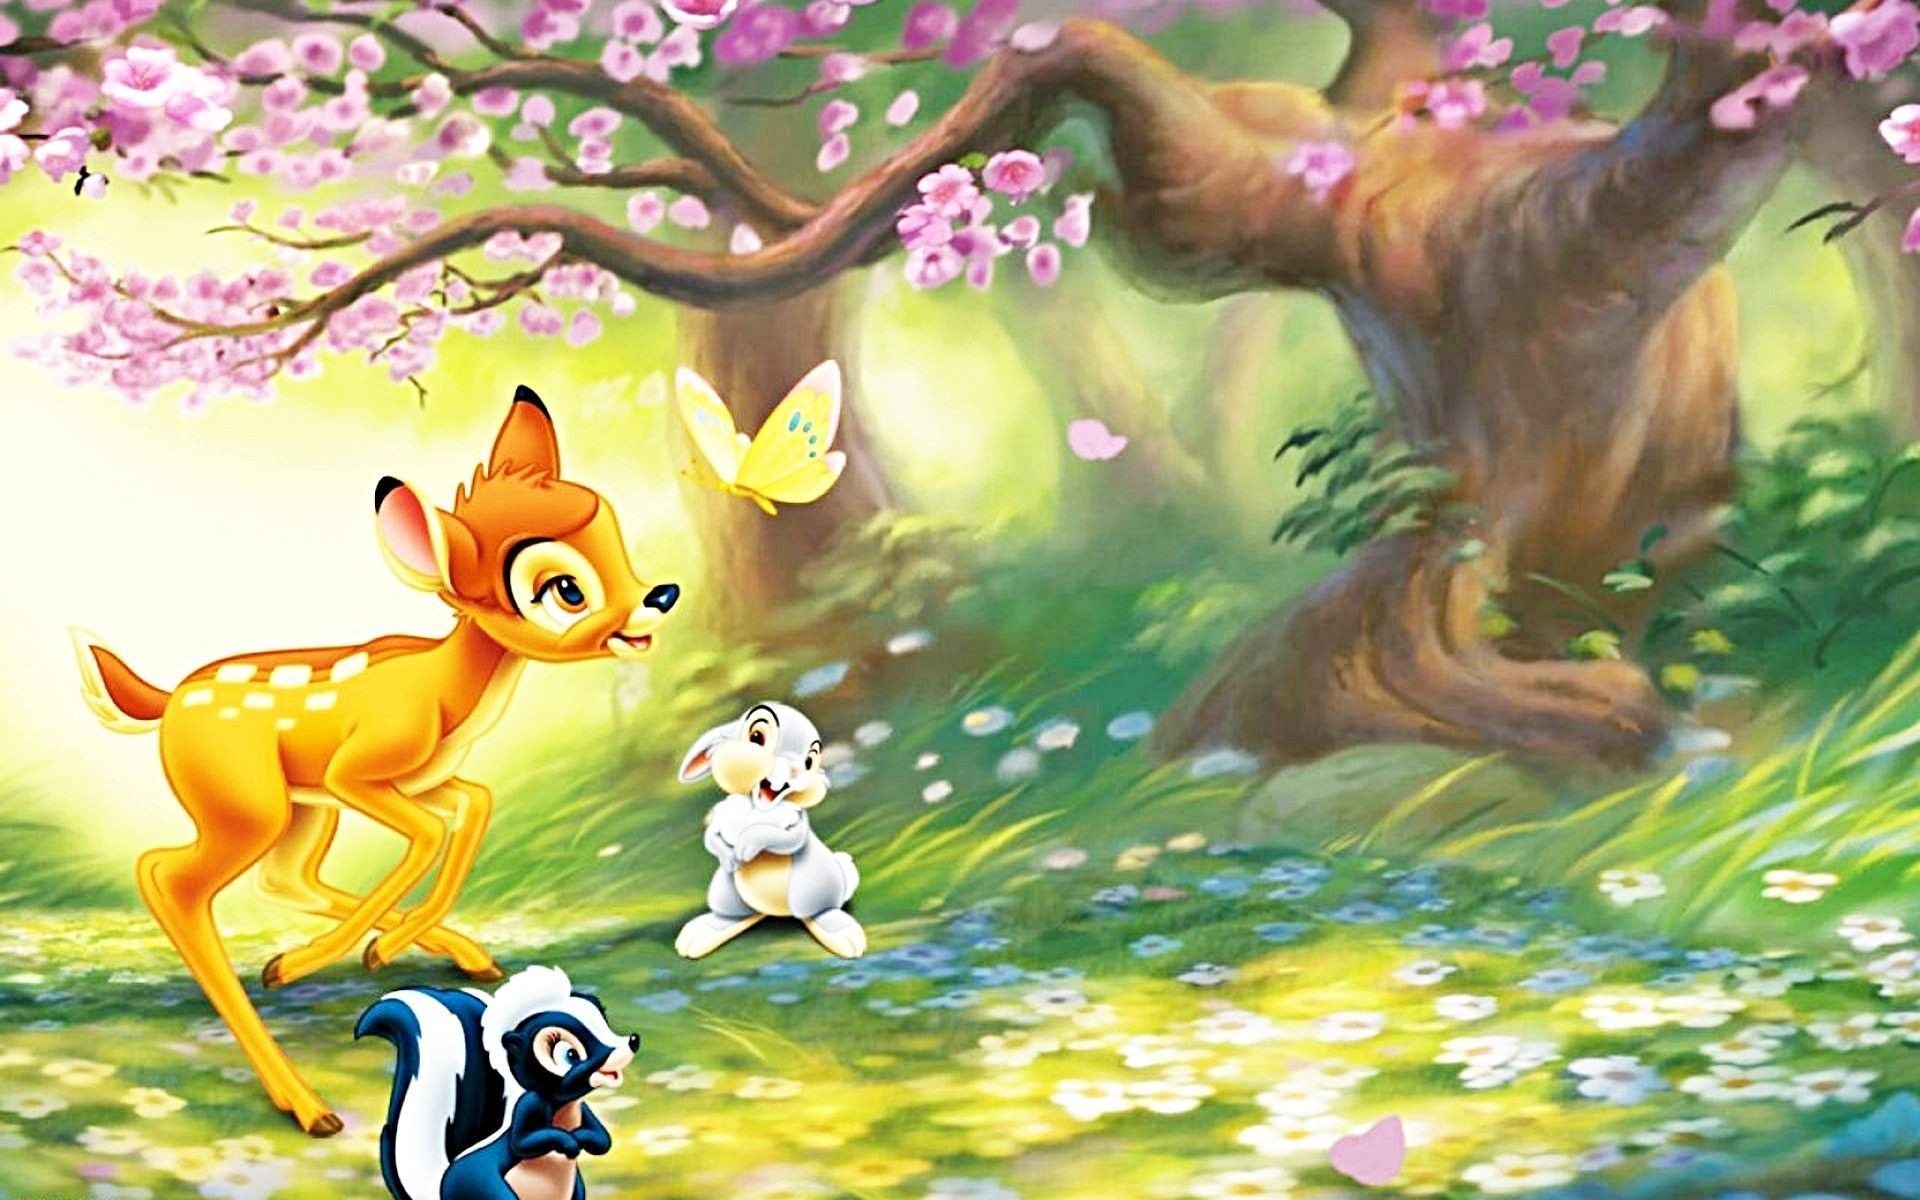 1920x1200 Download Bambi wallpaper on computer in high resolution for free. Get Bambi  wallpaper on computer and make this Bambi wallpaper on computer for you…